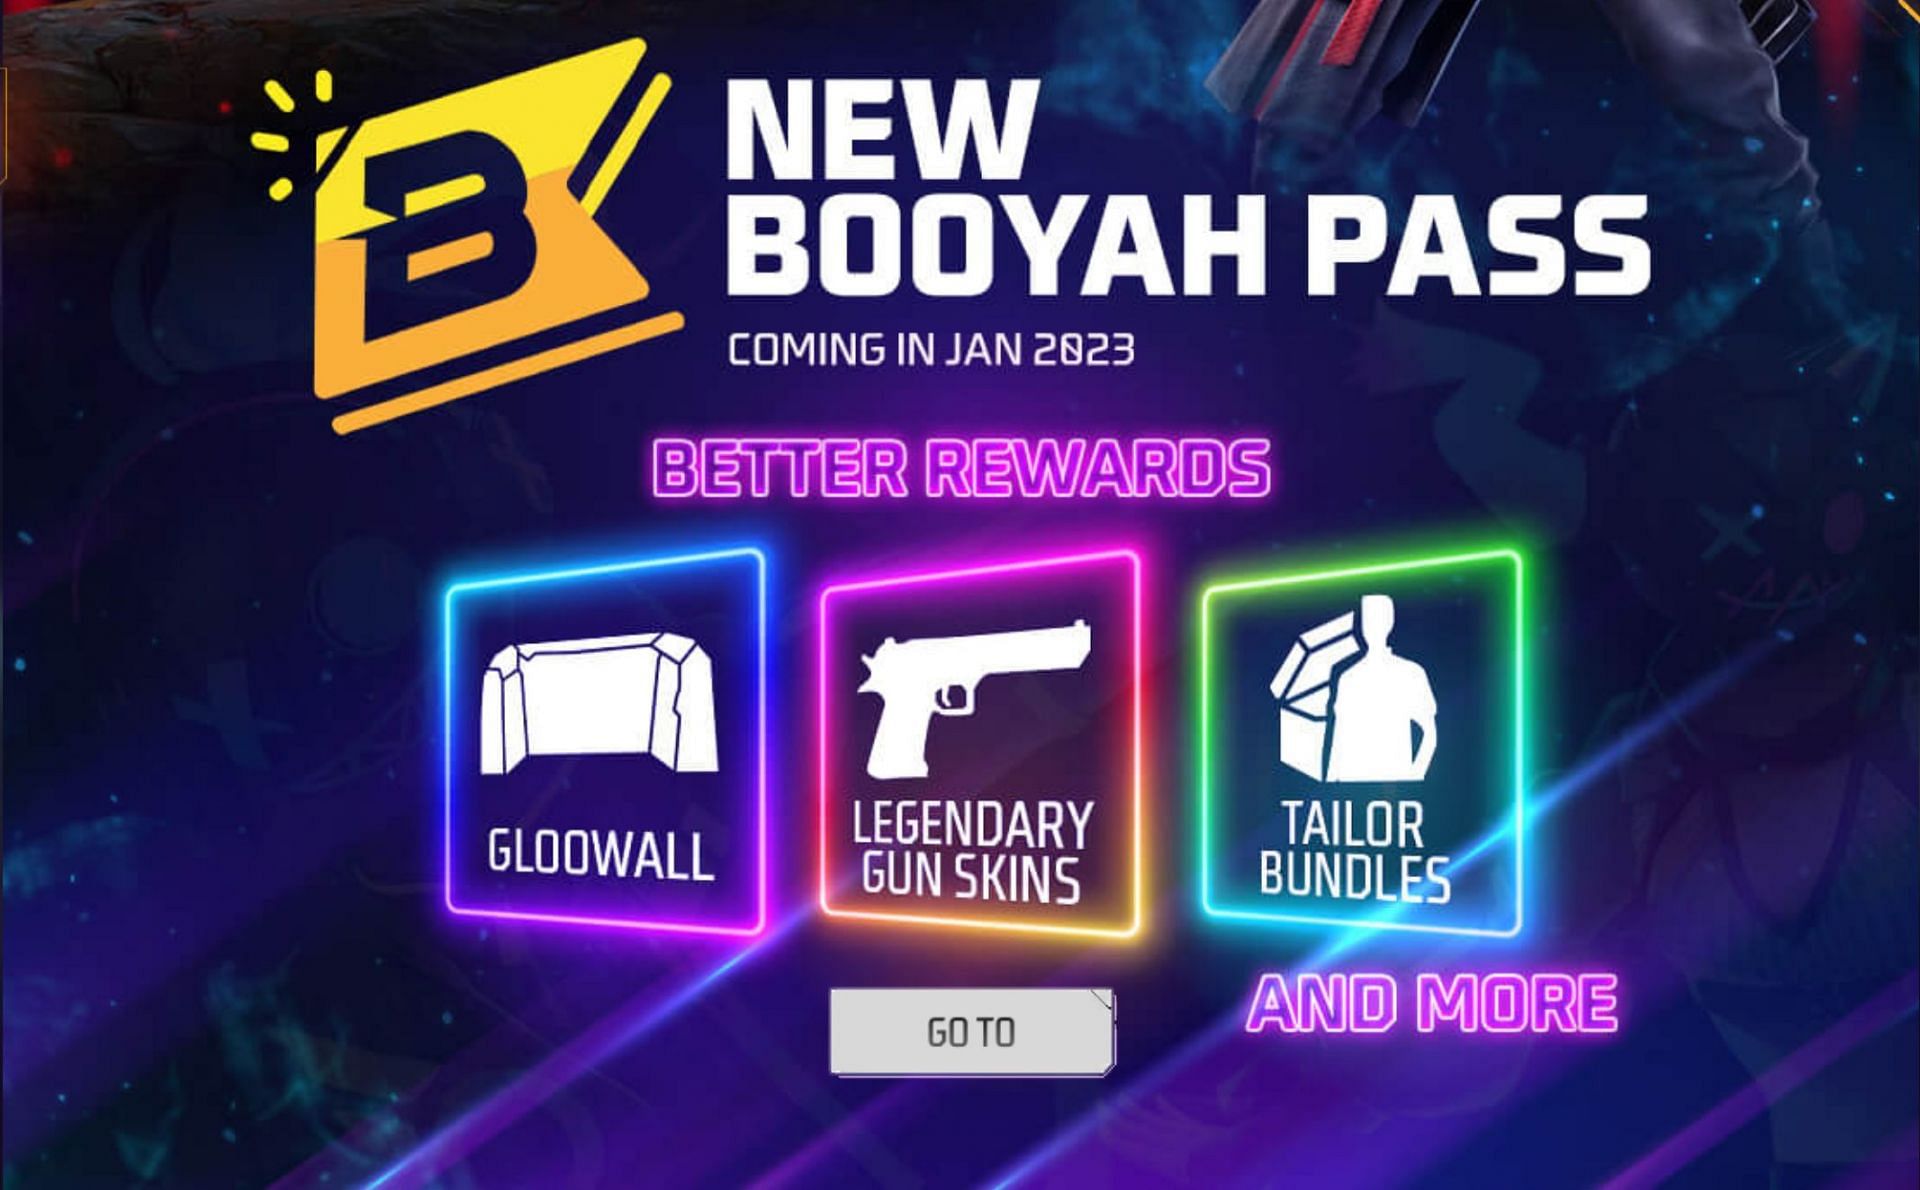 The new Booyah Pass will begin in January 2023 (Image via Garena)